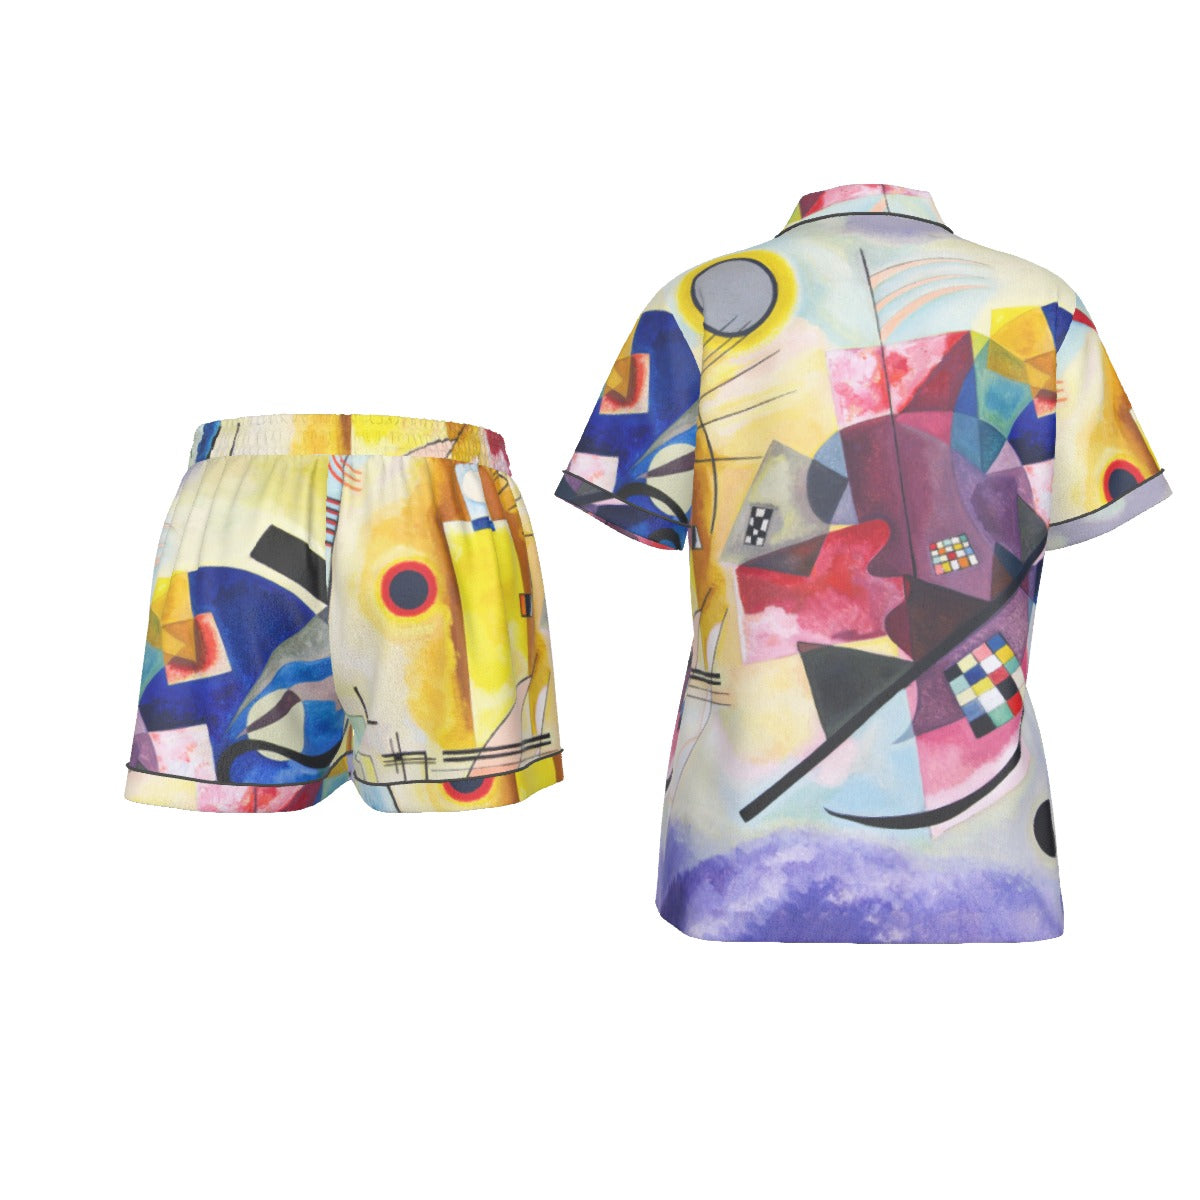 Abstract Art Inspired Lounge Wear